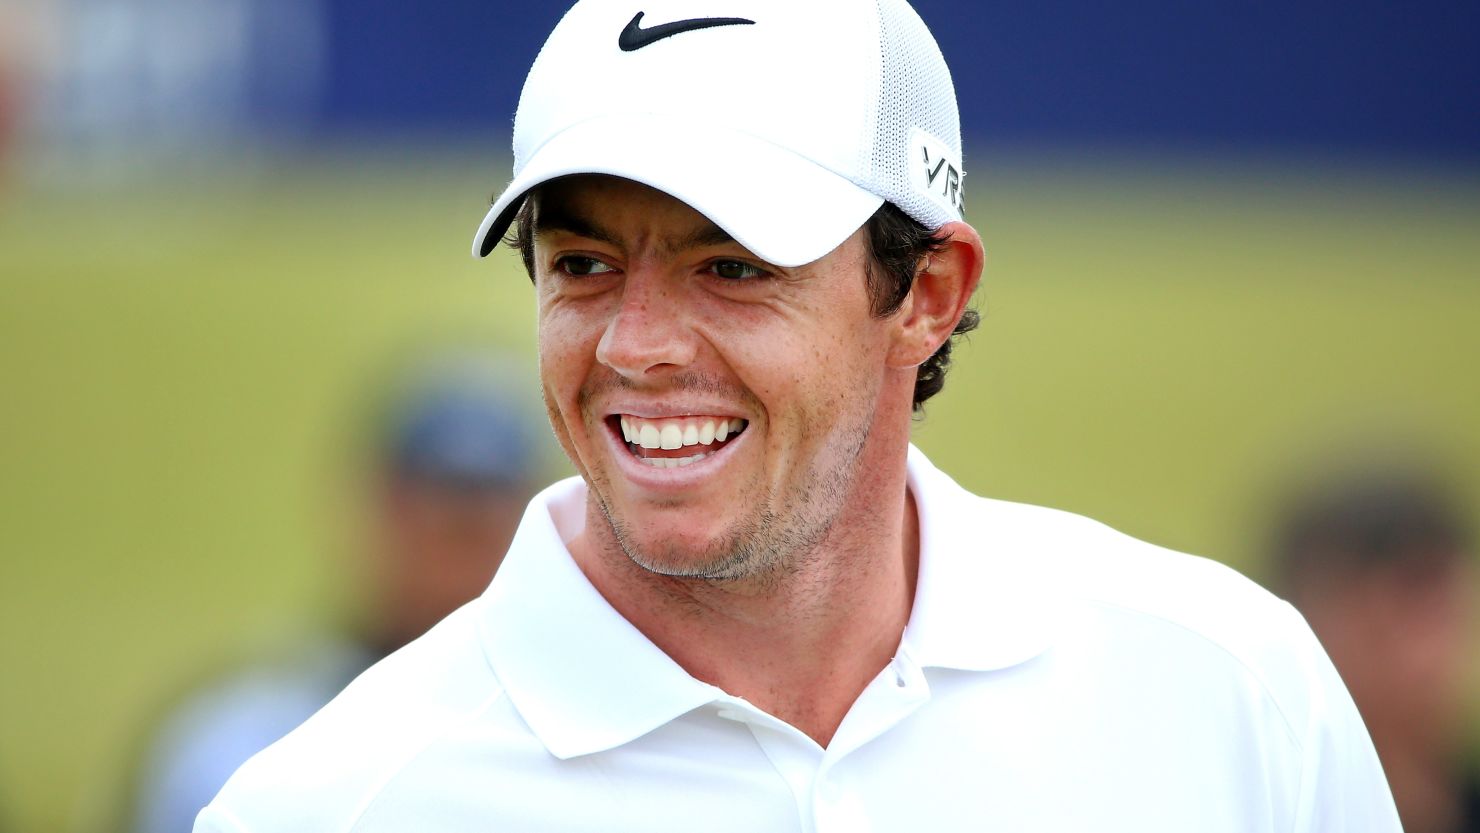 Rory McIlroy was smiling Saturday after his disastrous round Friday at the Scottish Open.